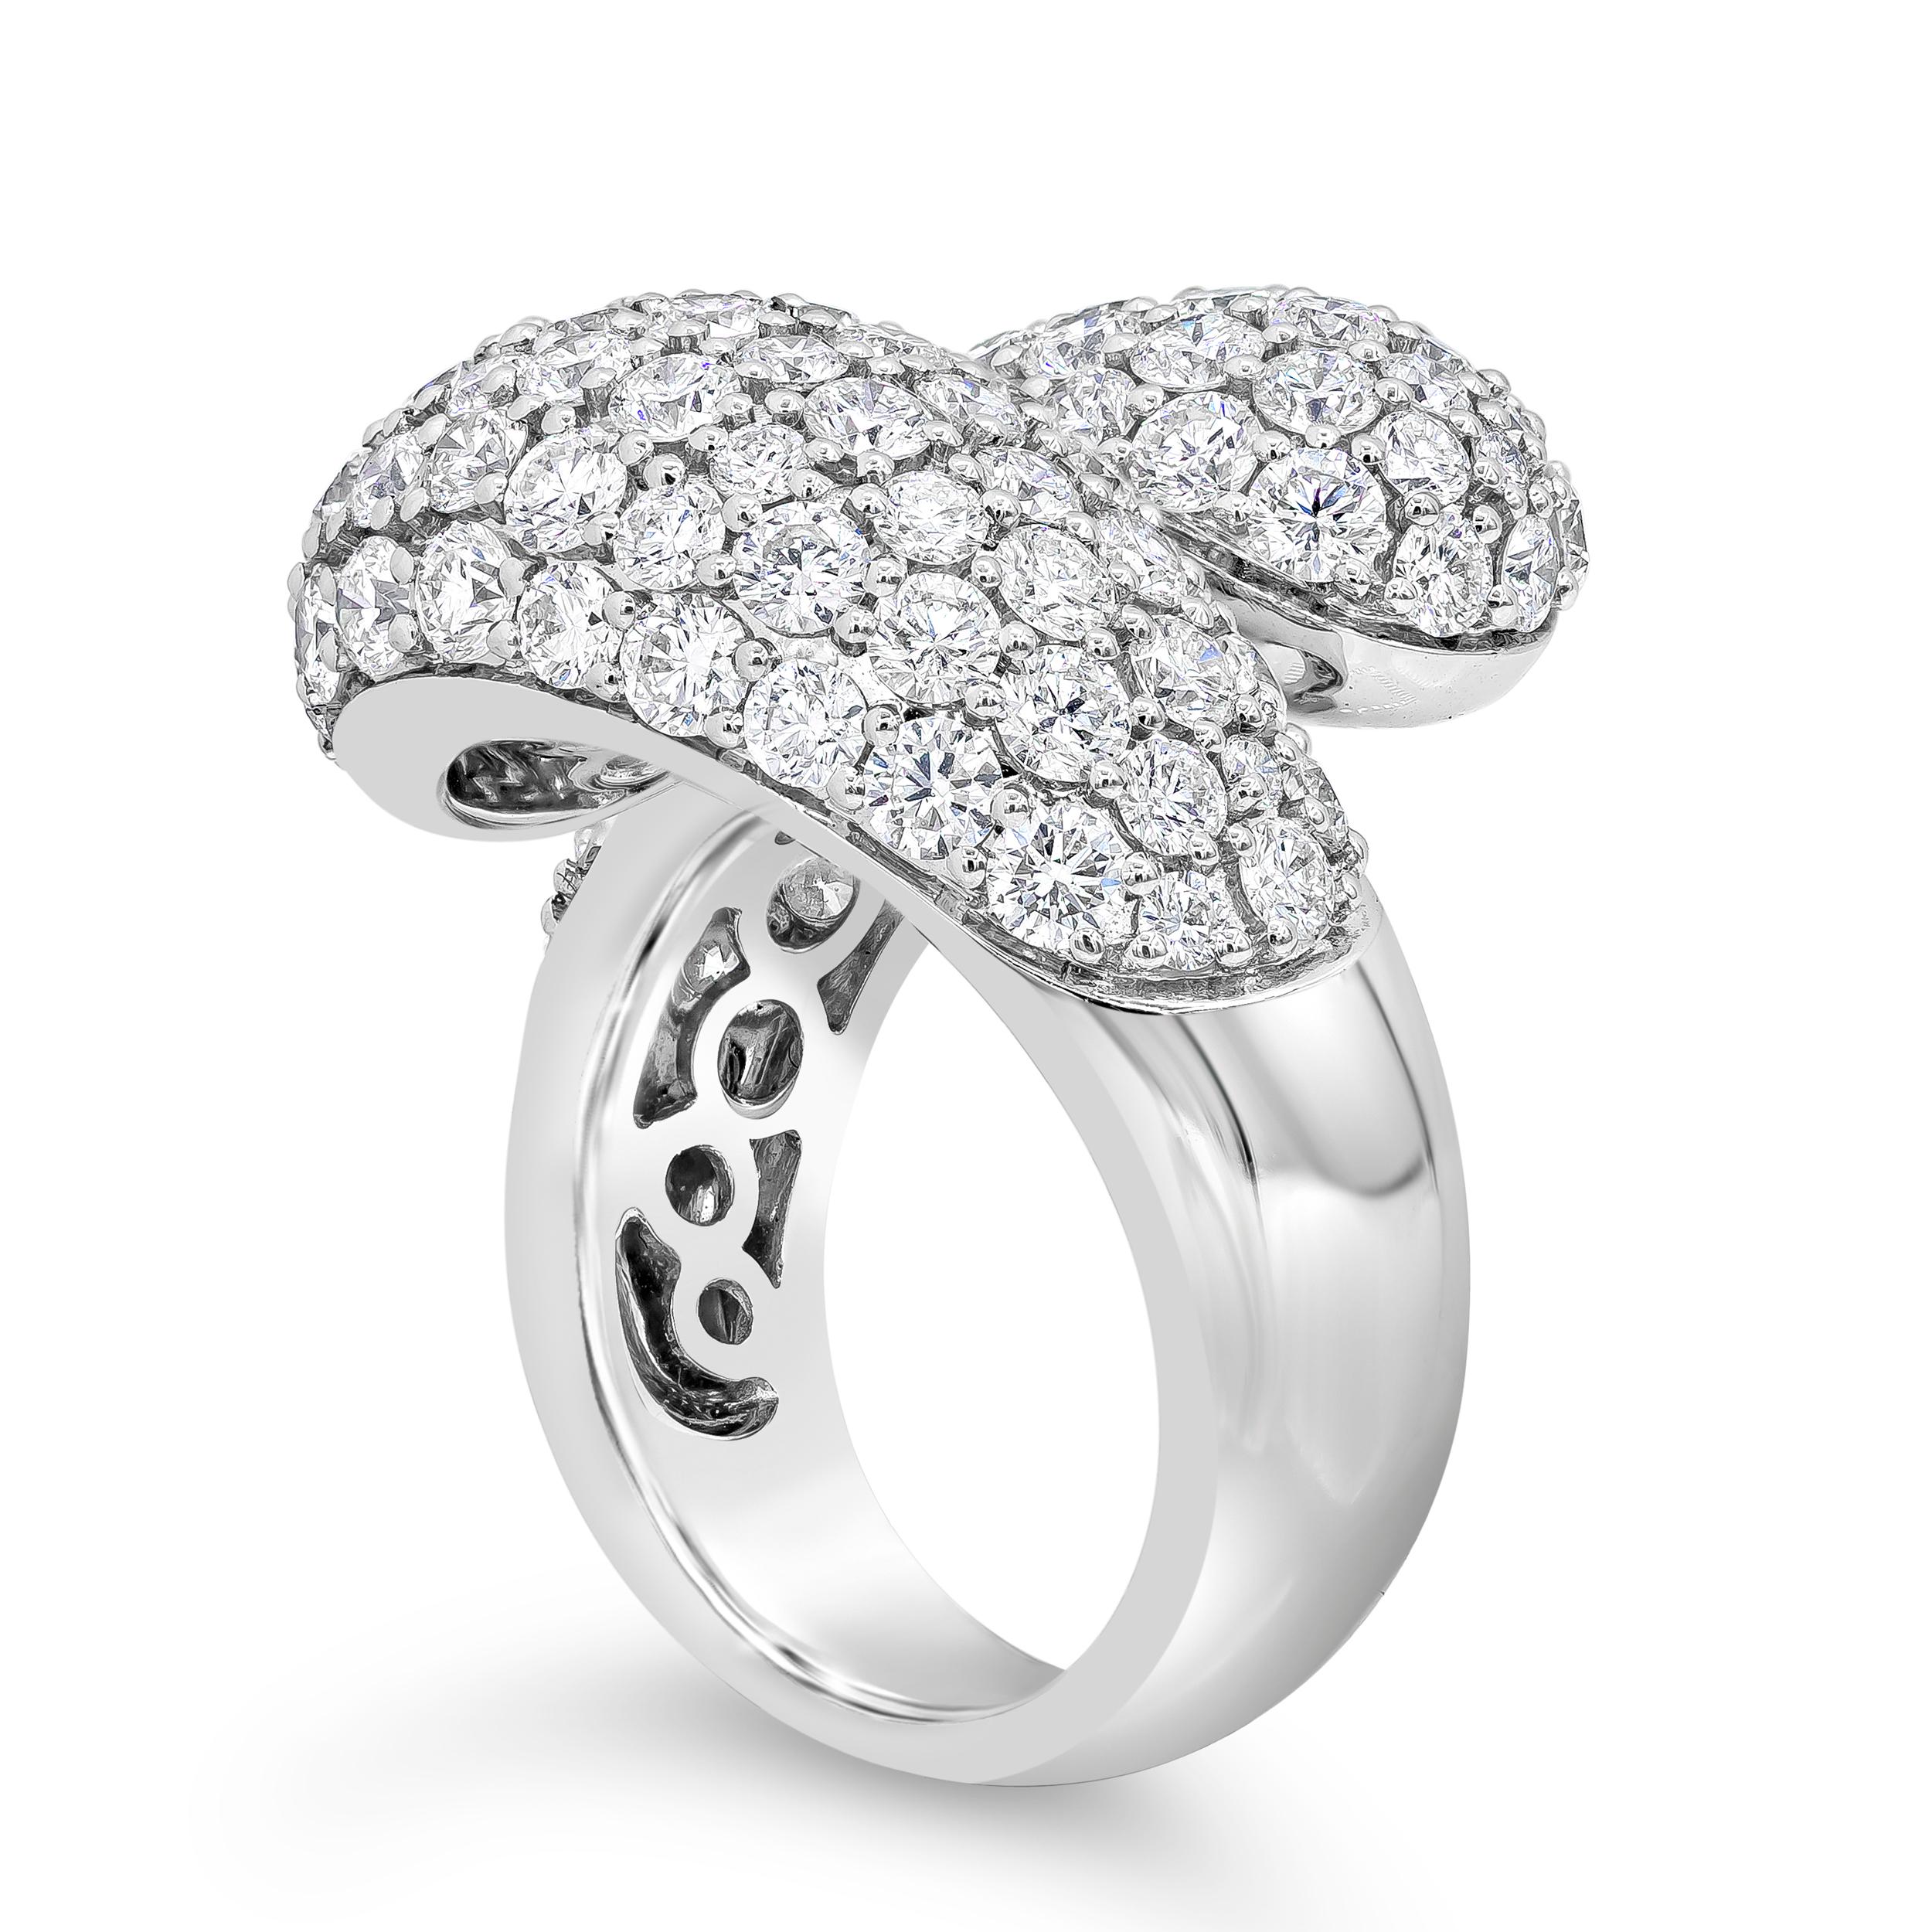 A fashionable and chic ring showcasing 118 round brilliant diamonds weighing 5.69 carats total, micro-pave set in a timeless domed bypass design. Finely made in 18k white gold. Size 7.75 US resizable upon request, 0.94 inches in width and 0.31